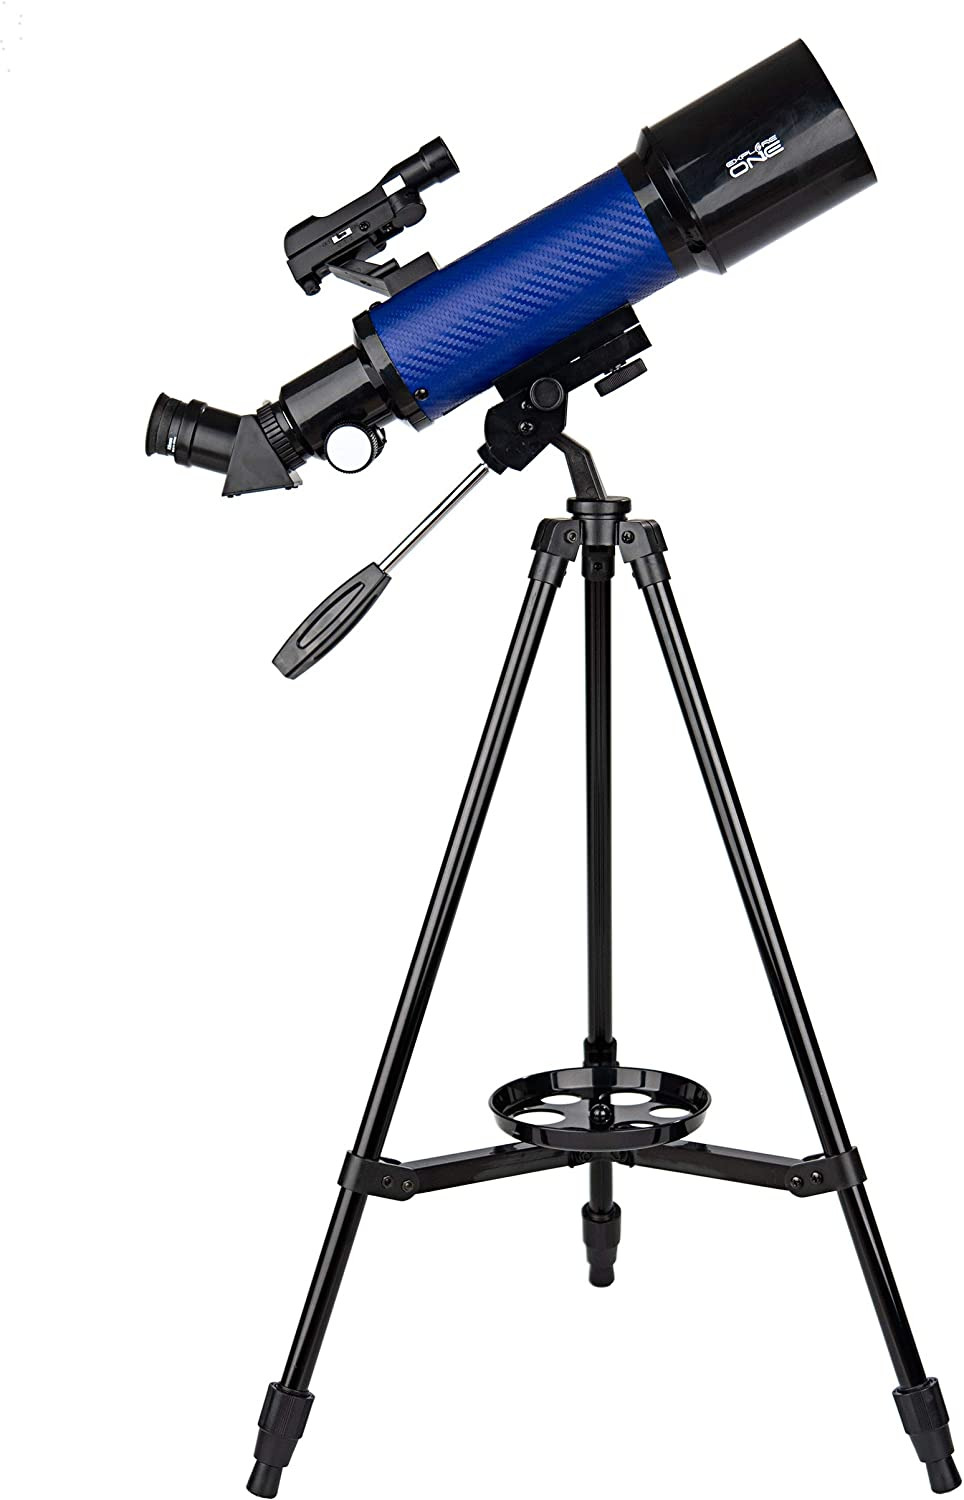 70mm Refractor Astronomy Telescope with Eyepieces Smartphone Adapter Tripod